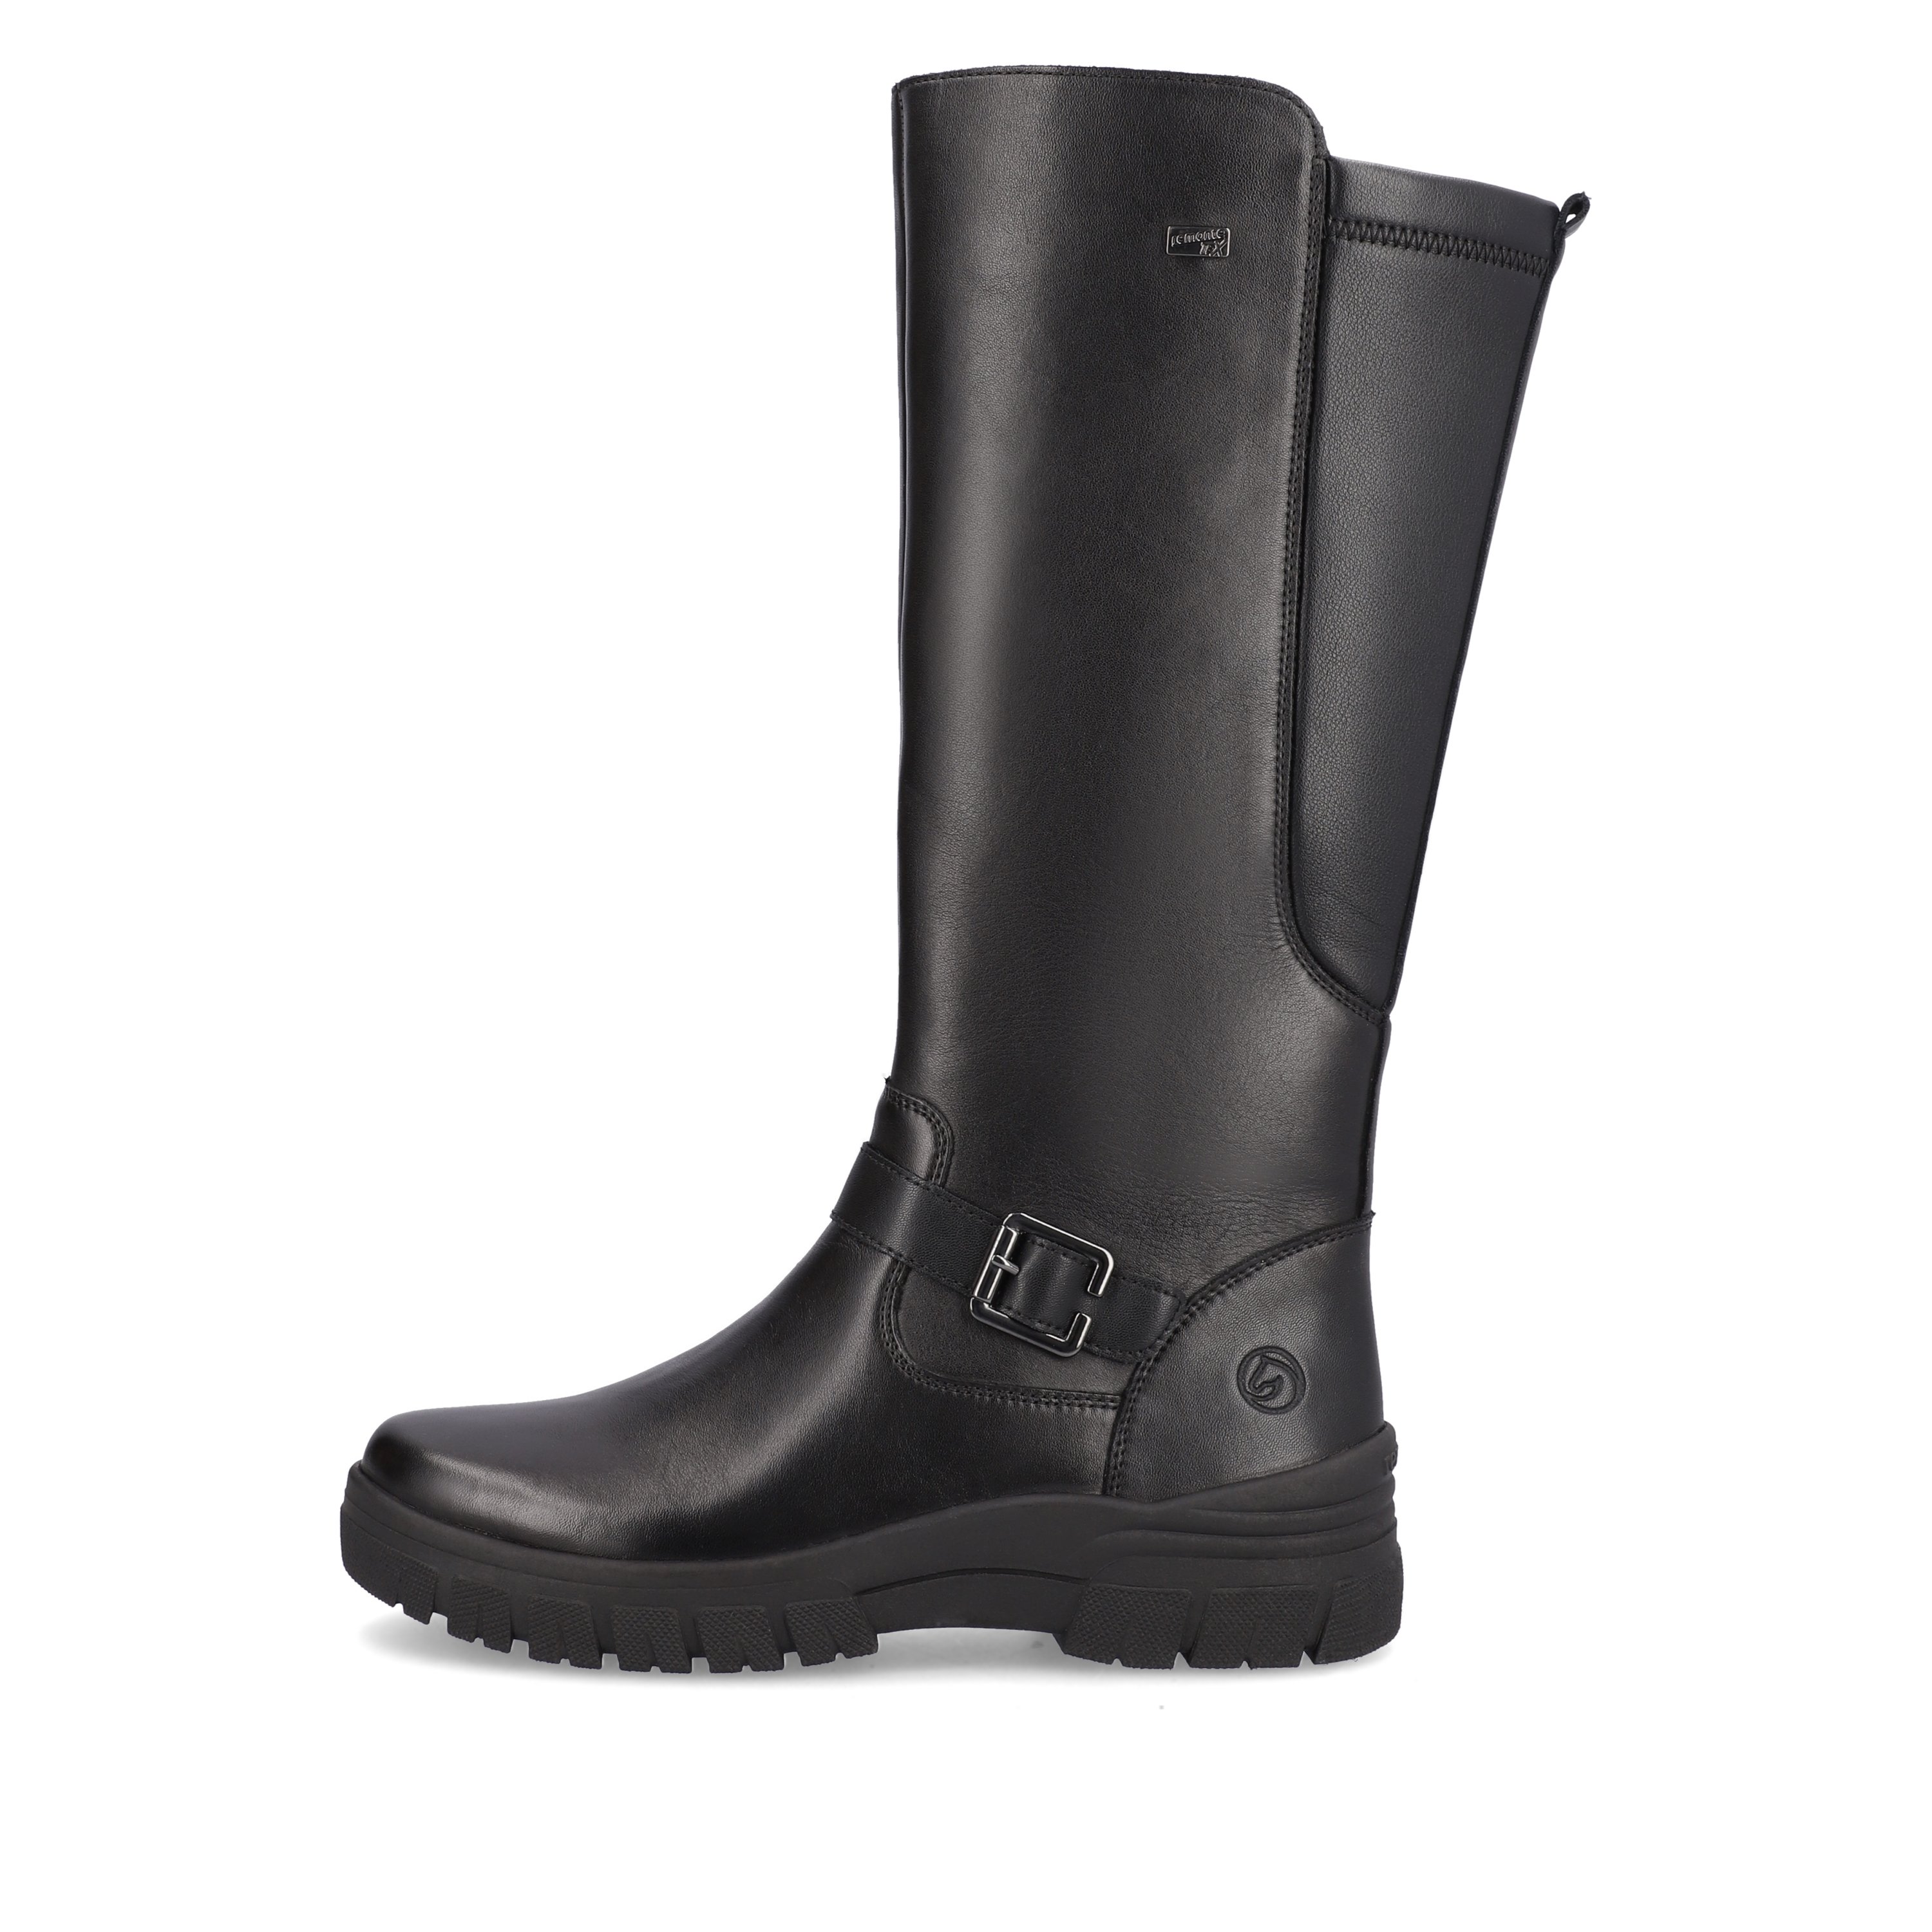 Jet black remonte women´s biker boots D0E75-01 with zipper as well as profile sole. The outside of the shoe